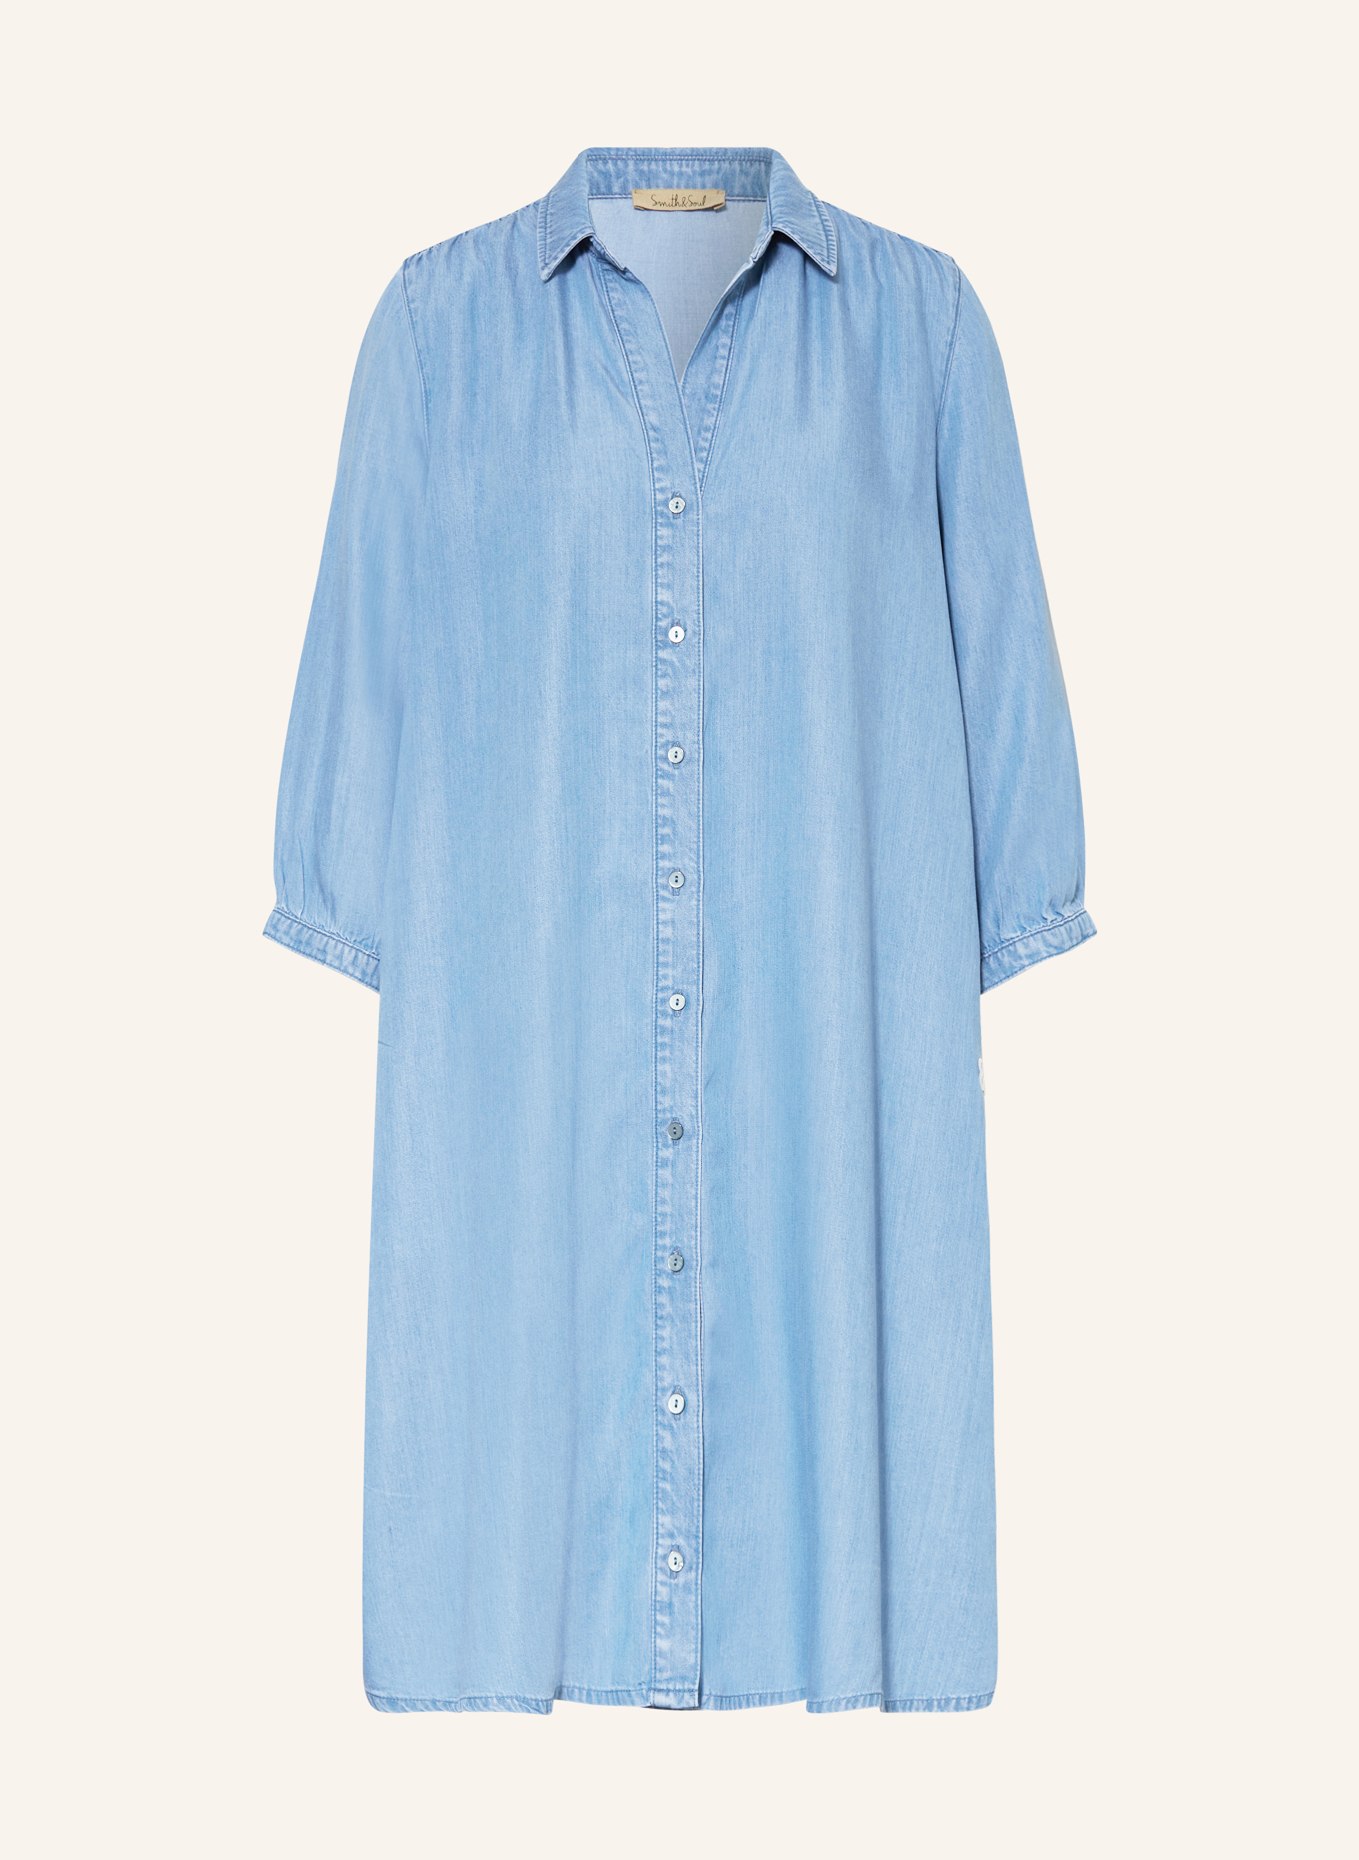 Smith & Soul Shirt dress in denim look with 3/4 sleeves, Color: LIGHT BLUE (Image 1)